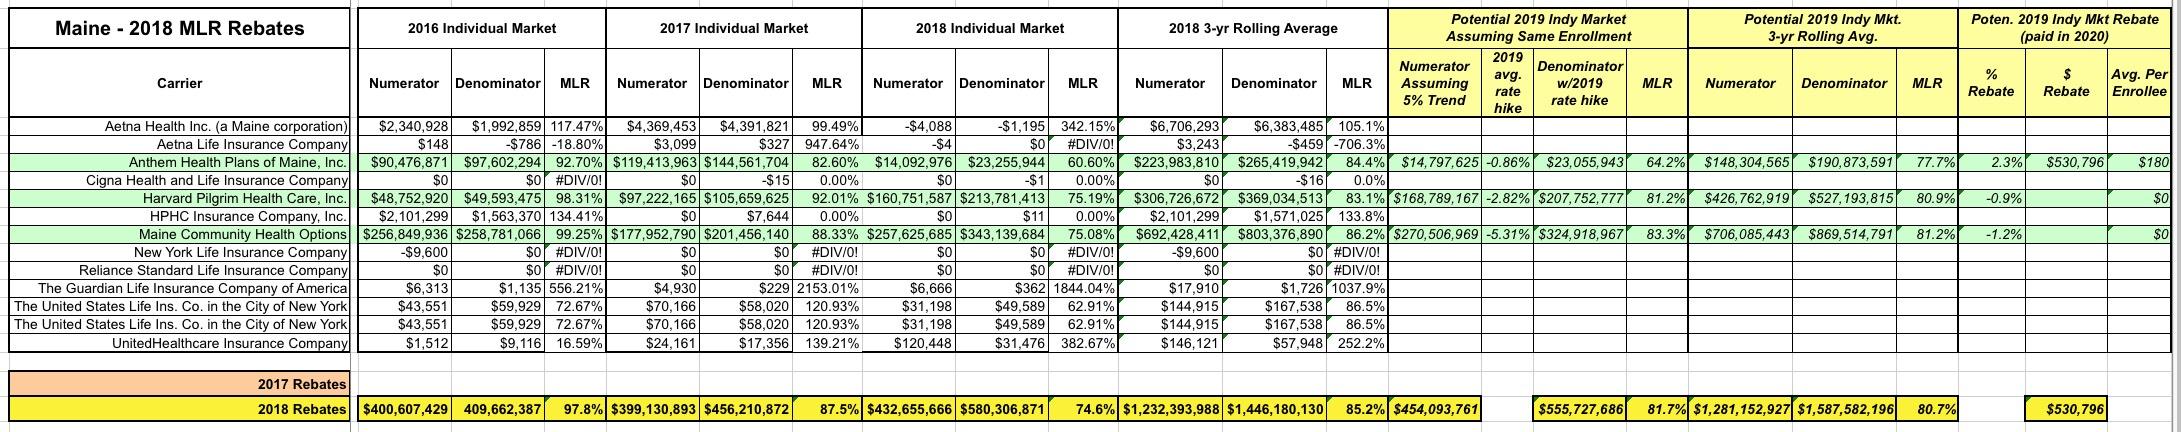 Maine The Most Boring MLR Rebate Table For At Least Two Years Running 